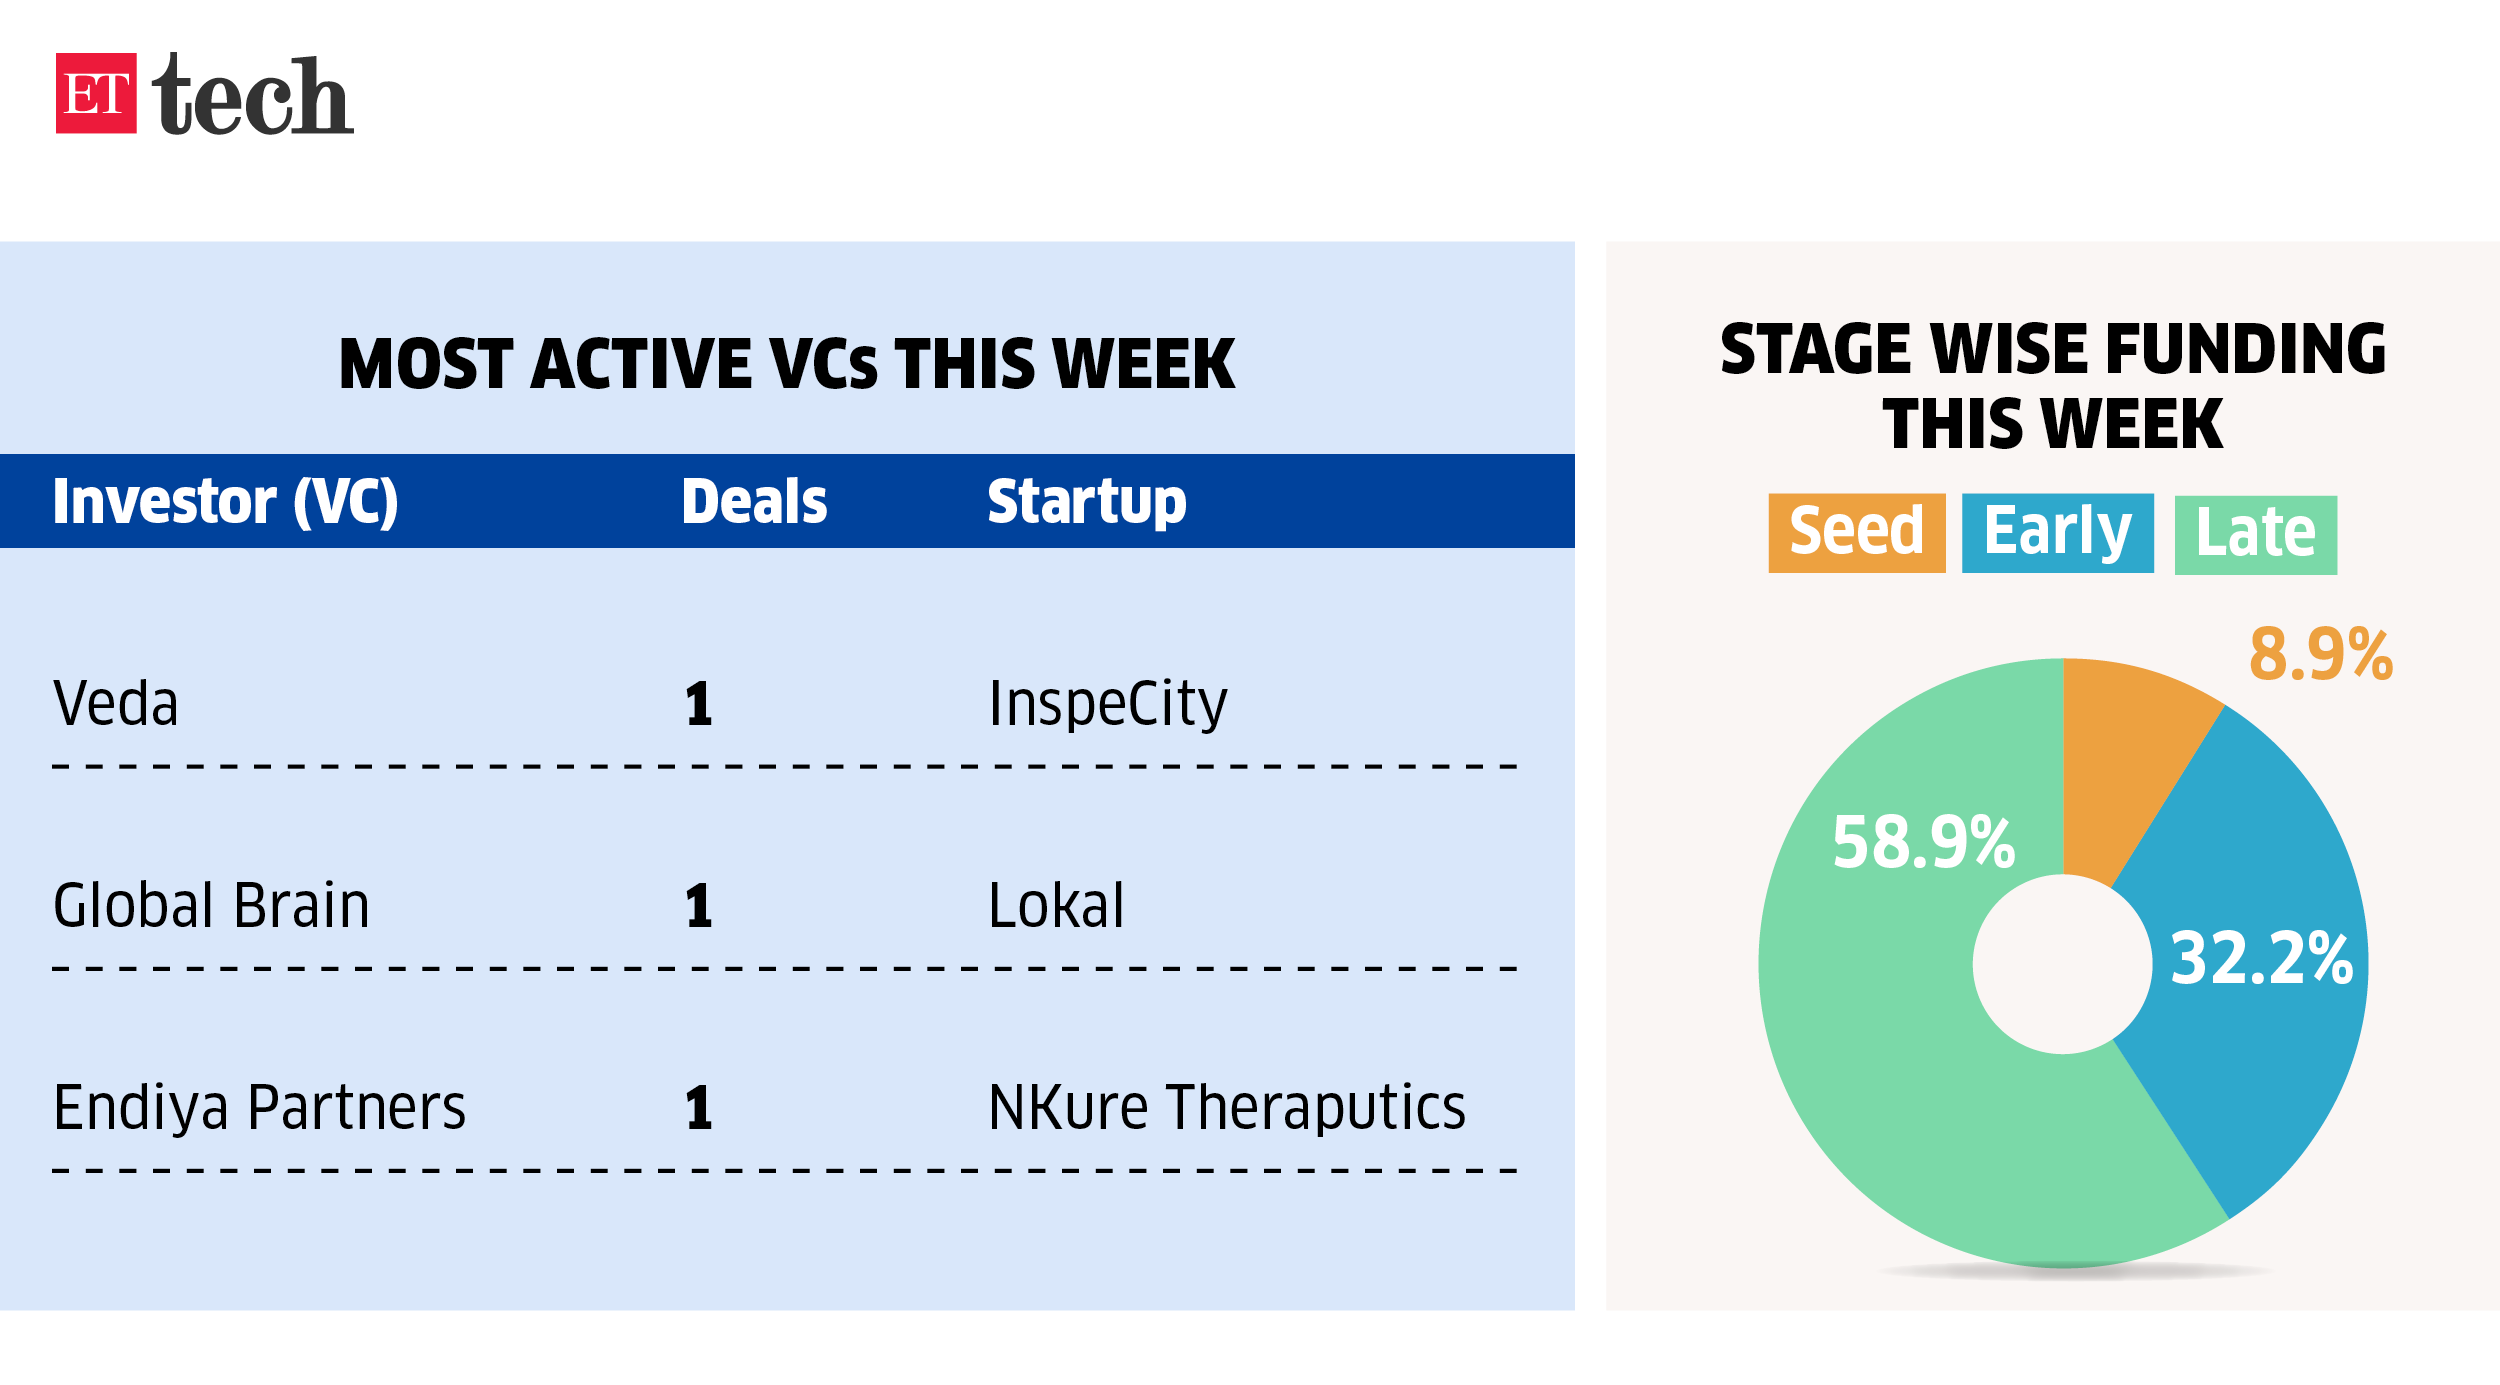 Most active VCs this week